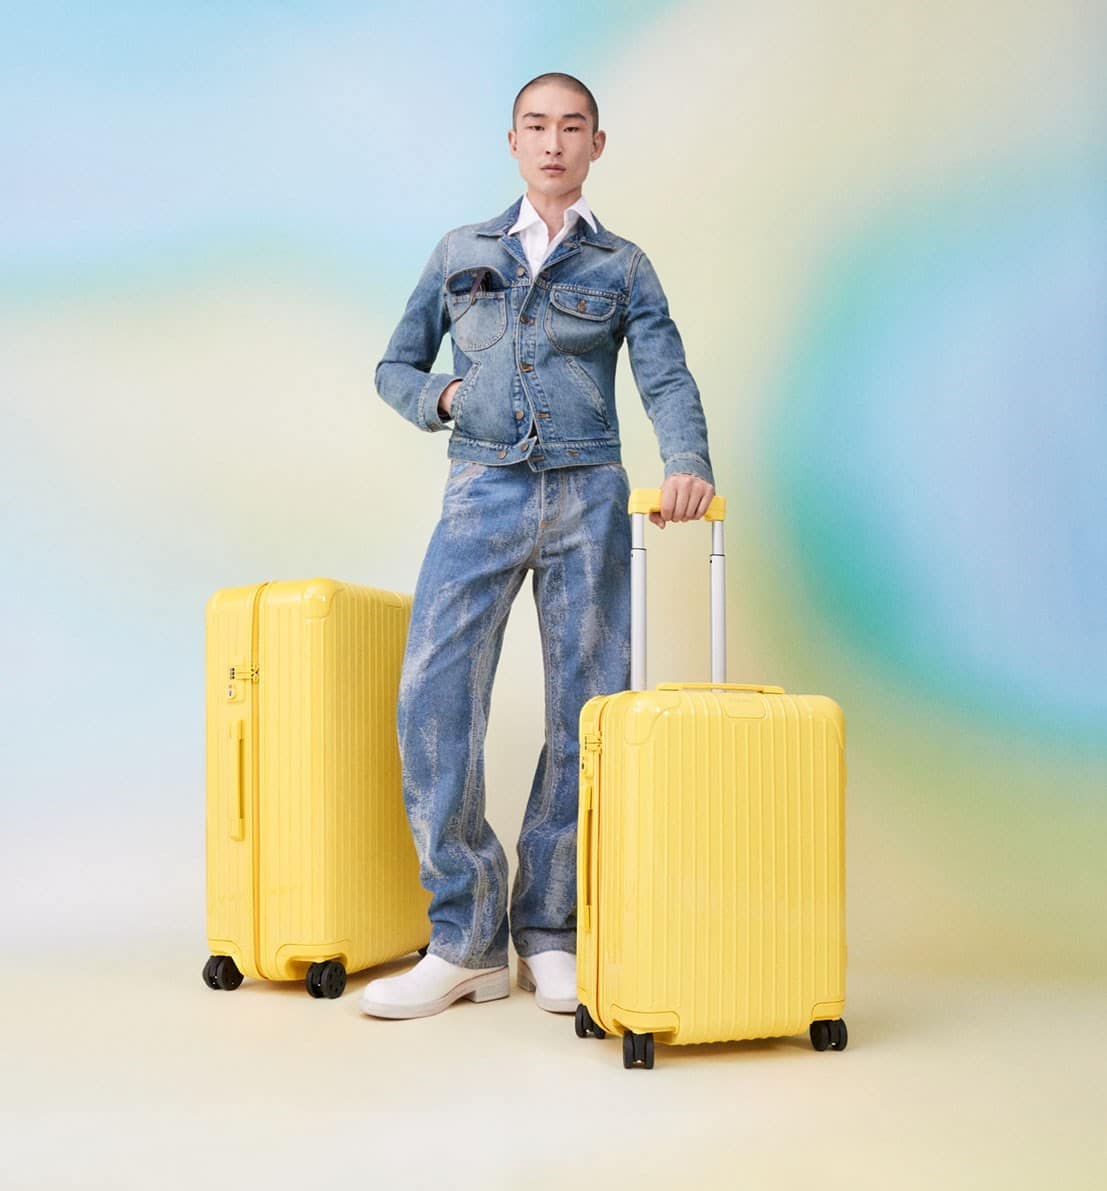 Rimowa Just Launched Its New 'Never Still' Bag Collection